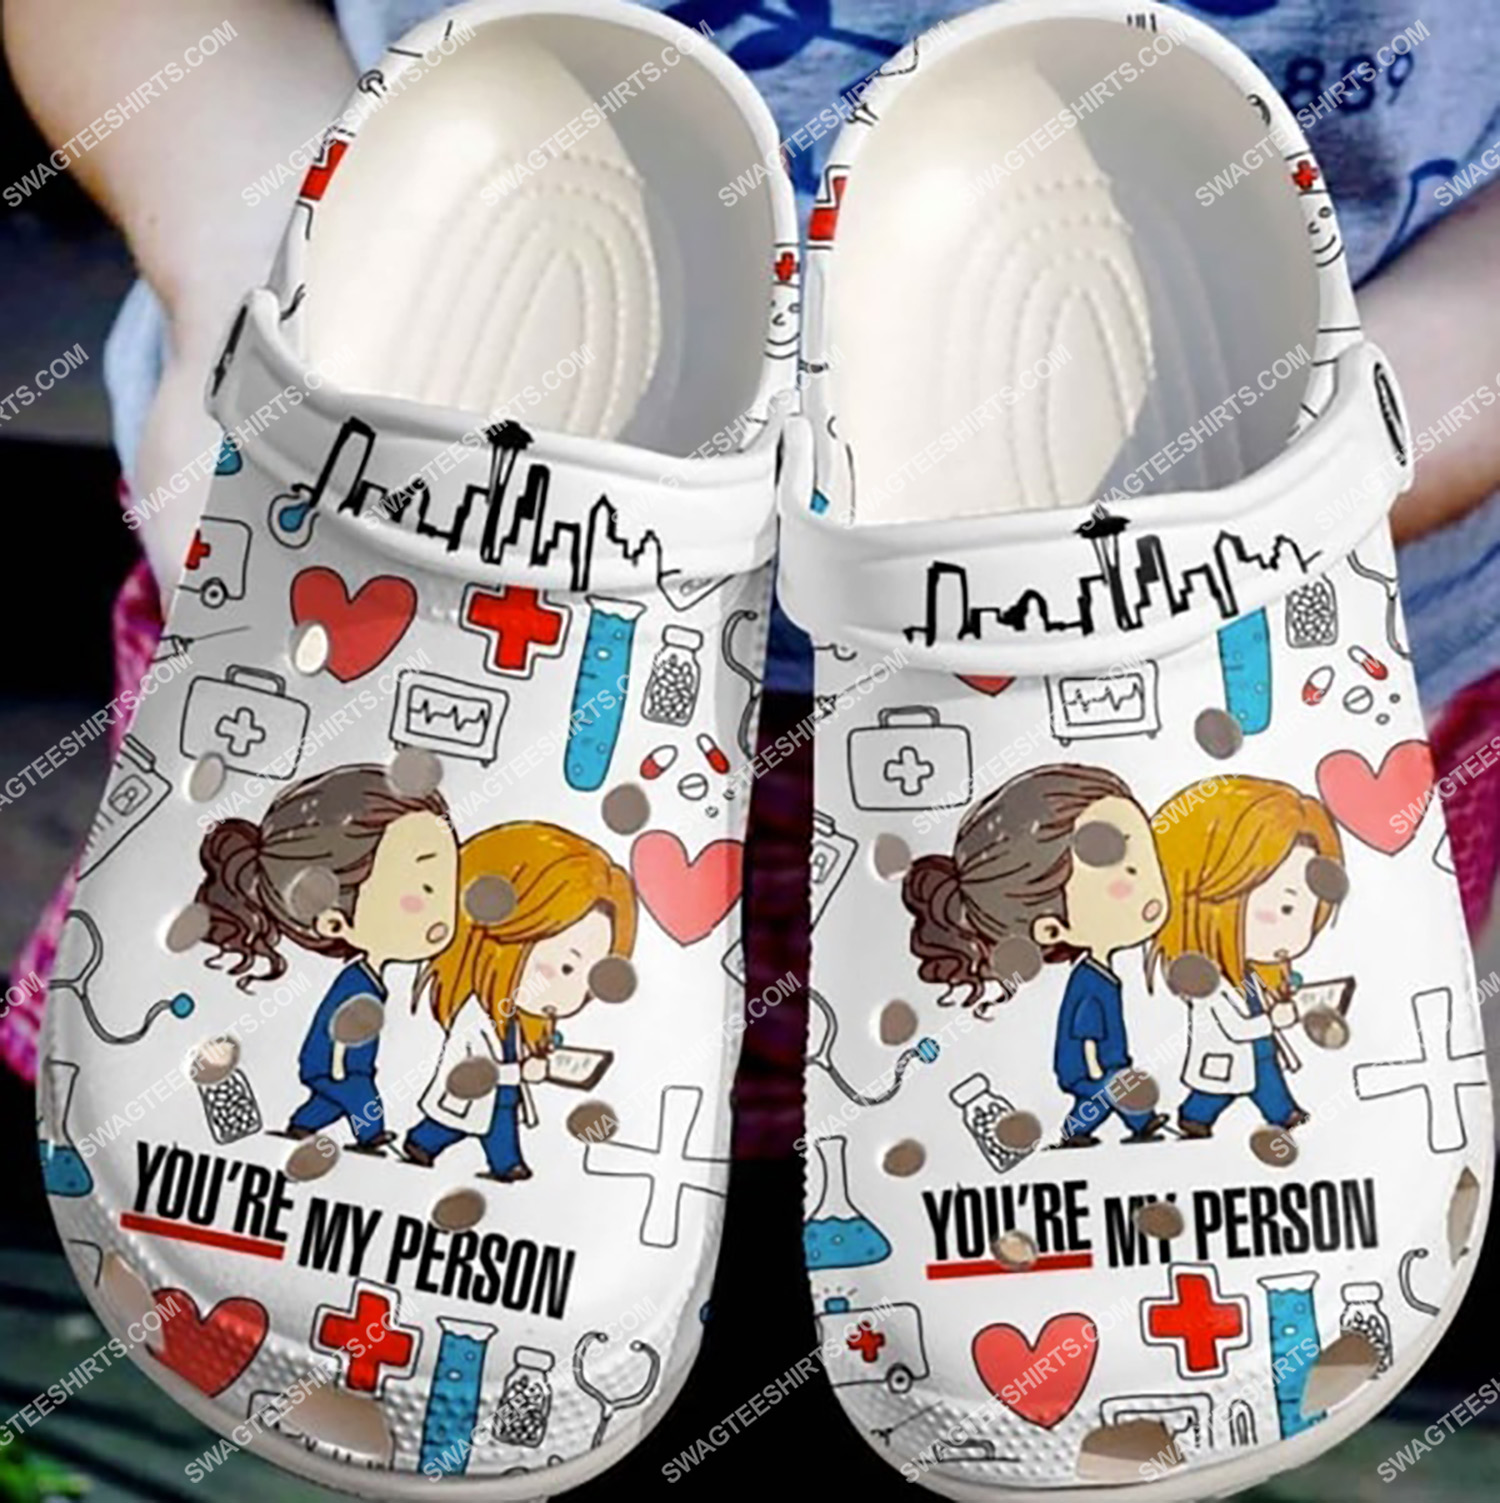 grey's anatomy you're my person all over printed crocs